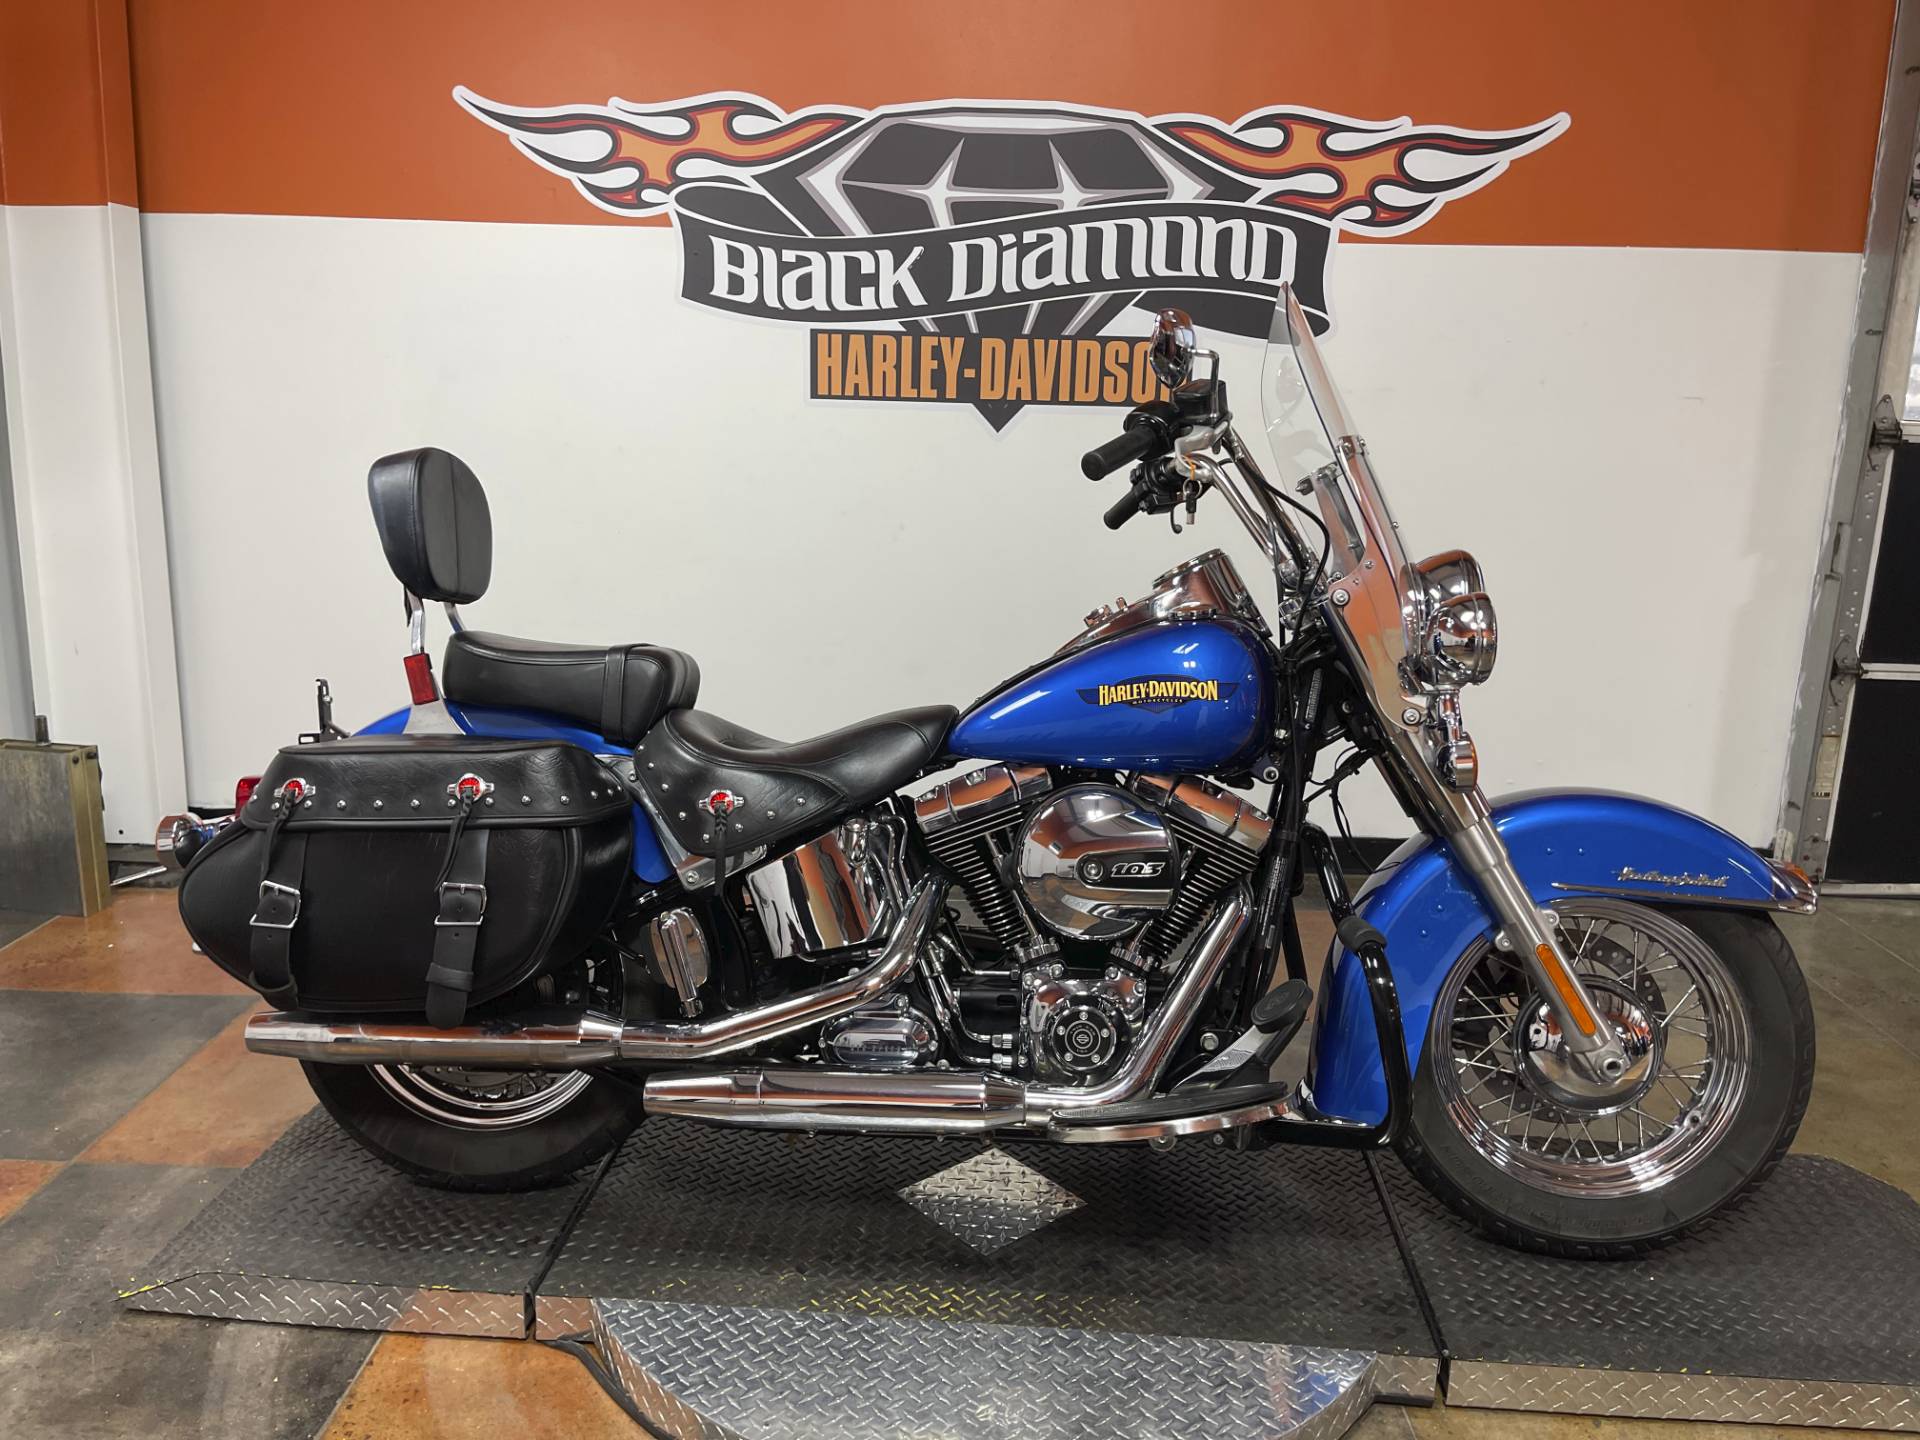 Used 2017 Harley Davidson Heritage Softail Classic Bonneville Blue Fathom Blue Motorcycles In Marion Il U023317